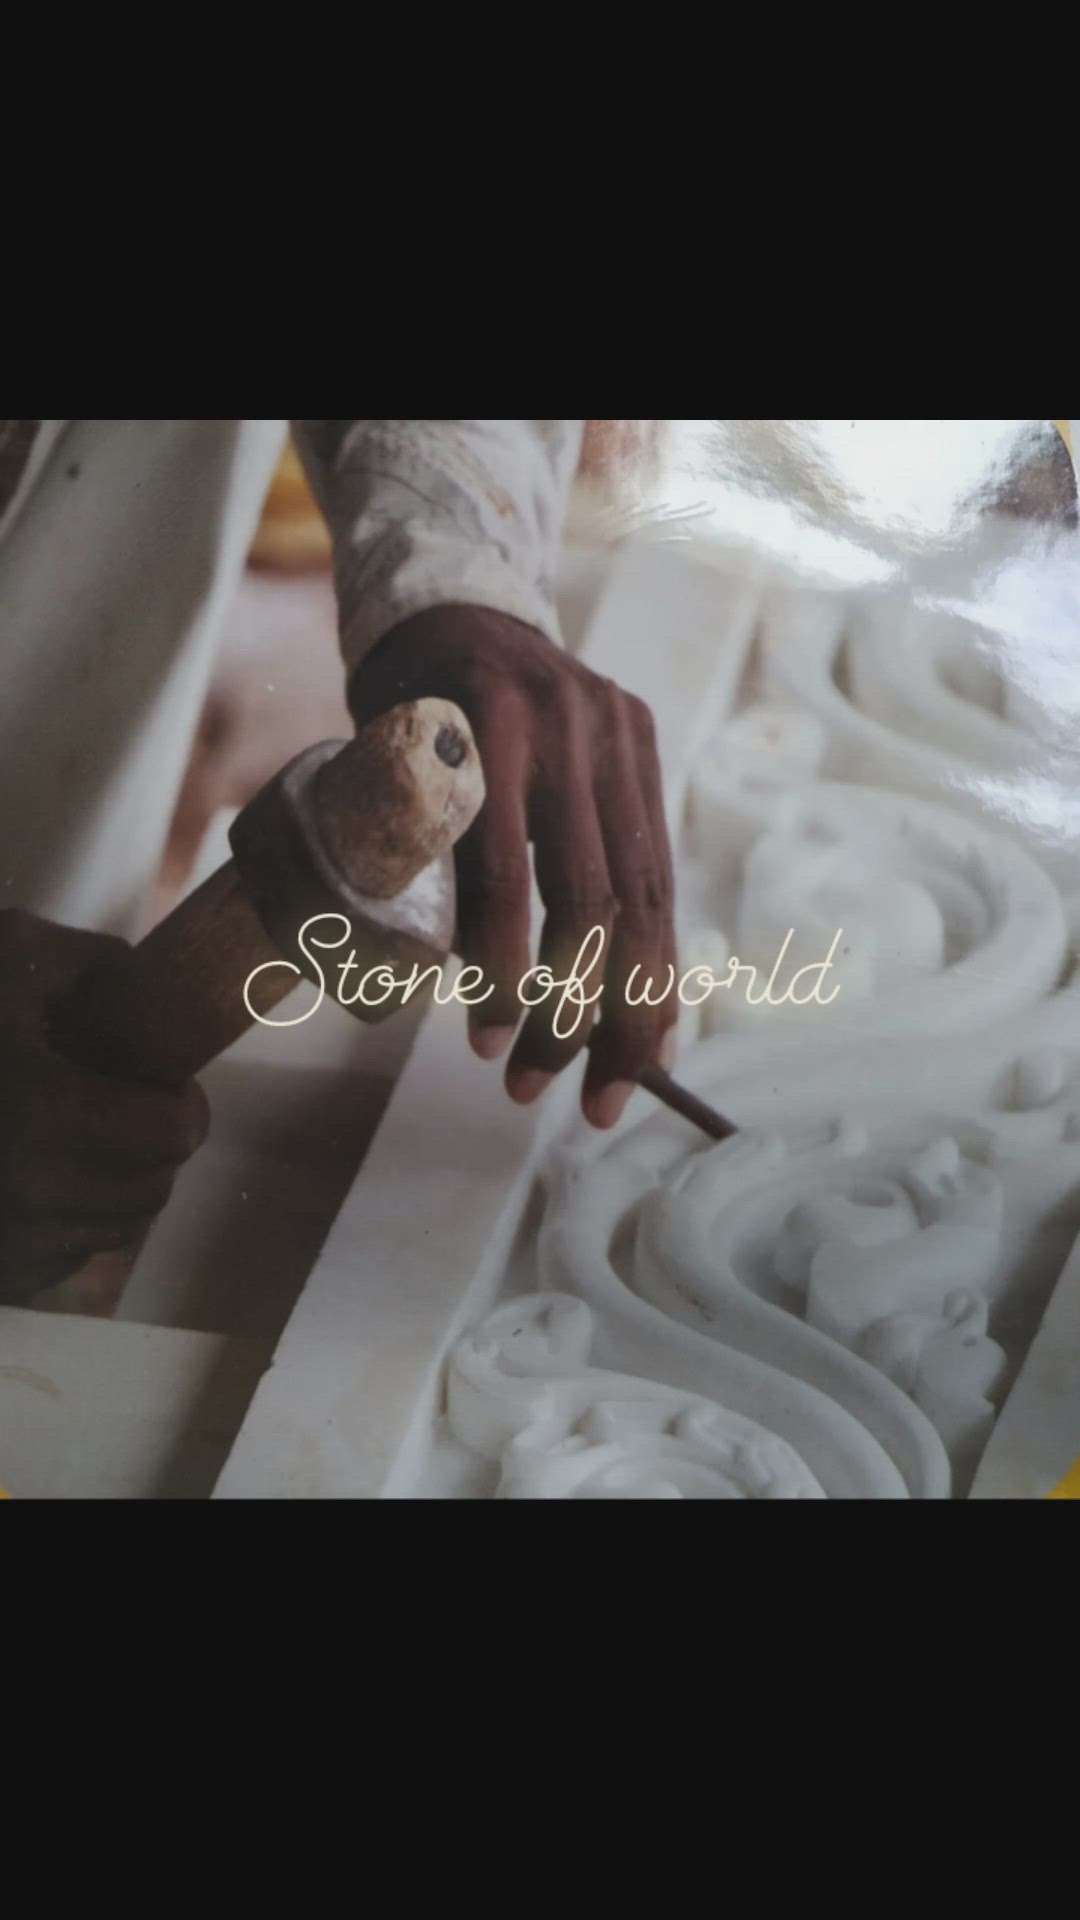 ​@stoneofworld 88900049119
Stone of world is a natural stone wall cladding tiles manufacturing and design company based in Udaipur, India. Founded in 2017 #WallDecors  #WallDesigns  #WALL_PANELLING #wallcladding  #wallcovering